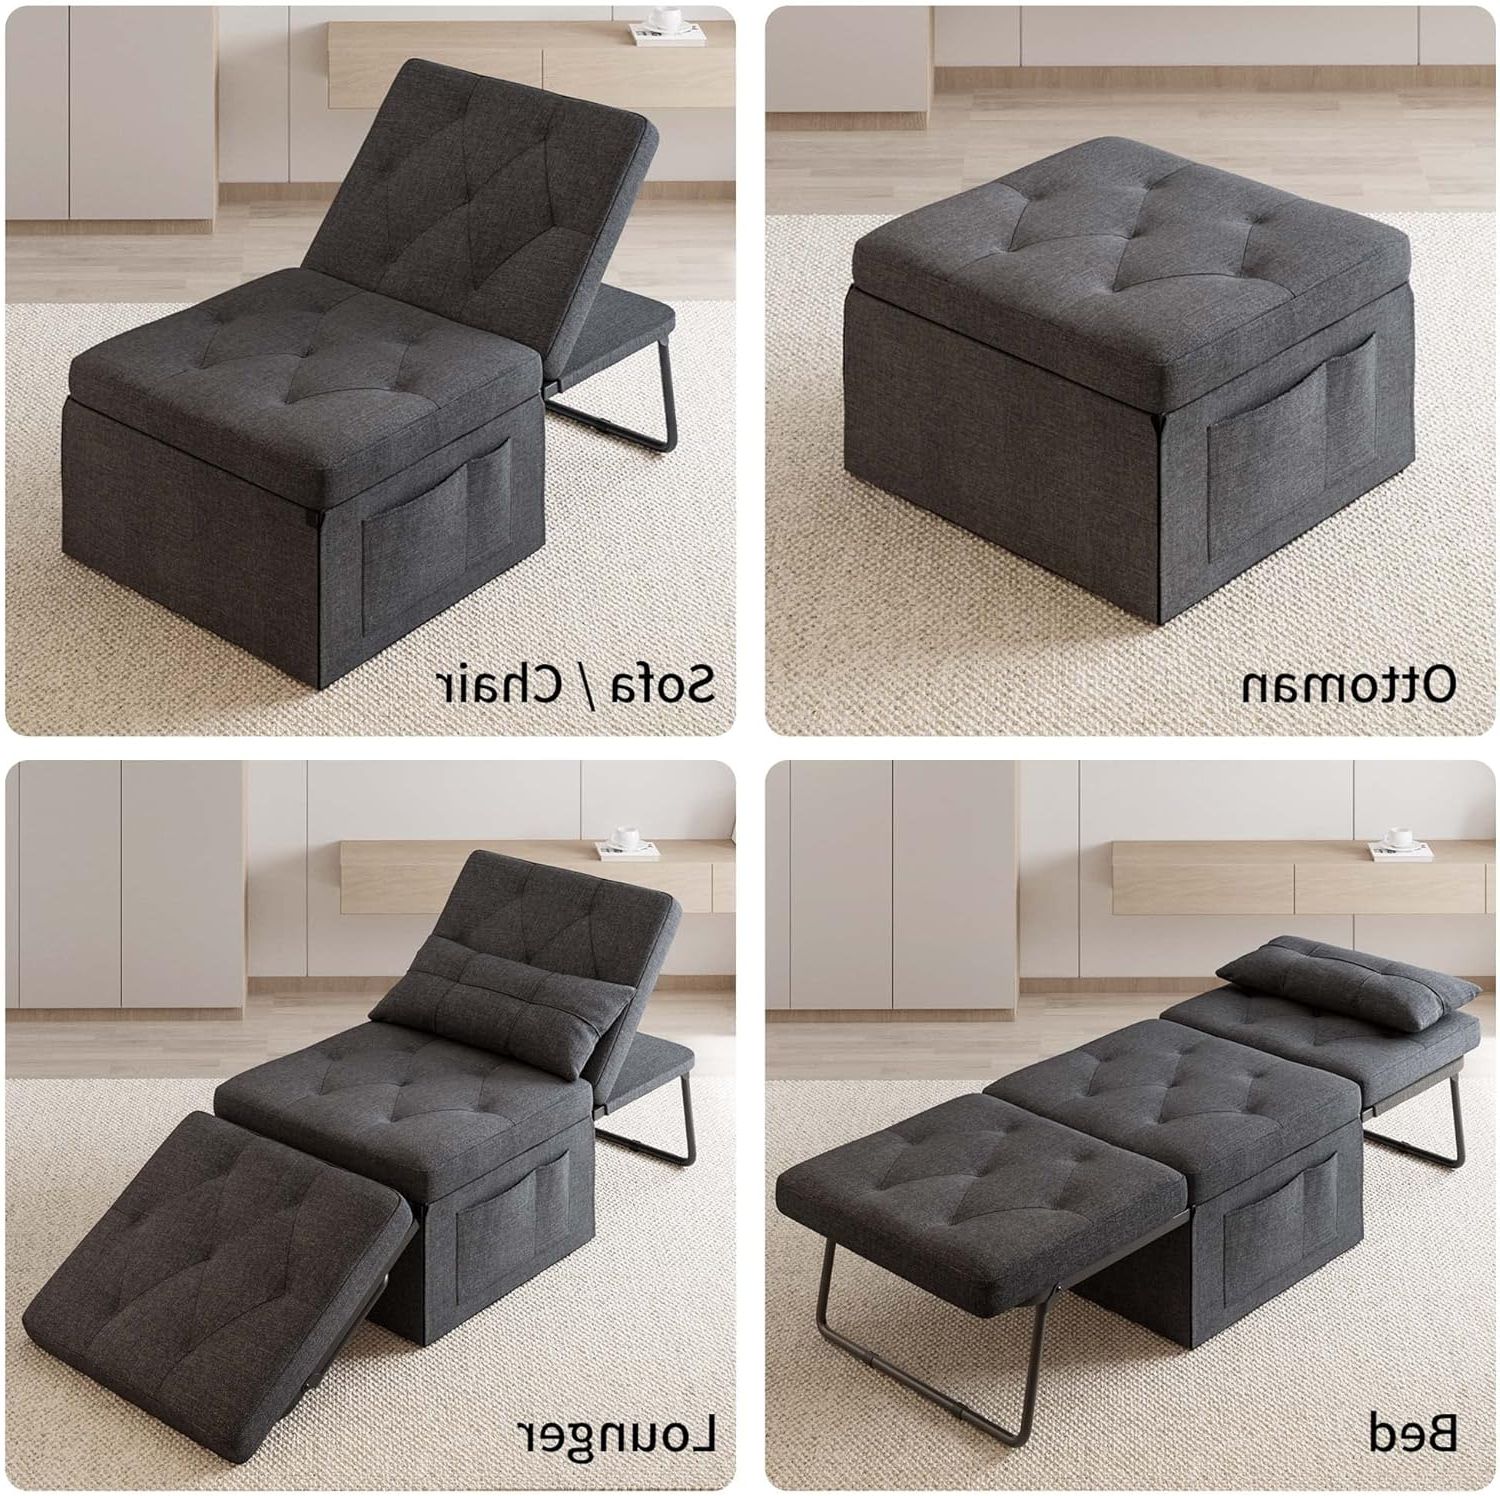 4 In 1 Convertible Sleeper Chair Beds Regarding Latest Buy Aiho Sofa Bed, 4 In 1 Sleeper Chair Bed Convertible Chair Guest Bed (Photo 11 of 15)